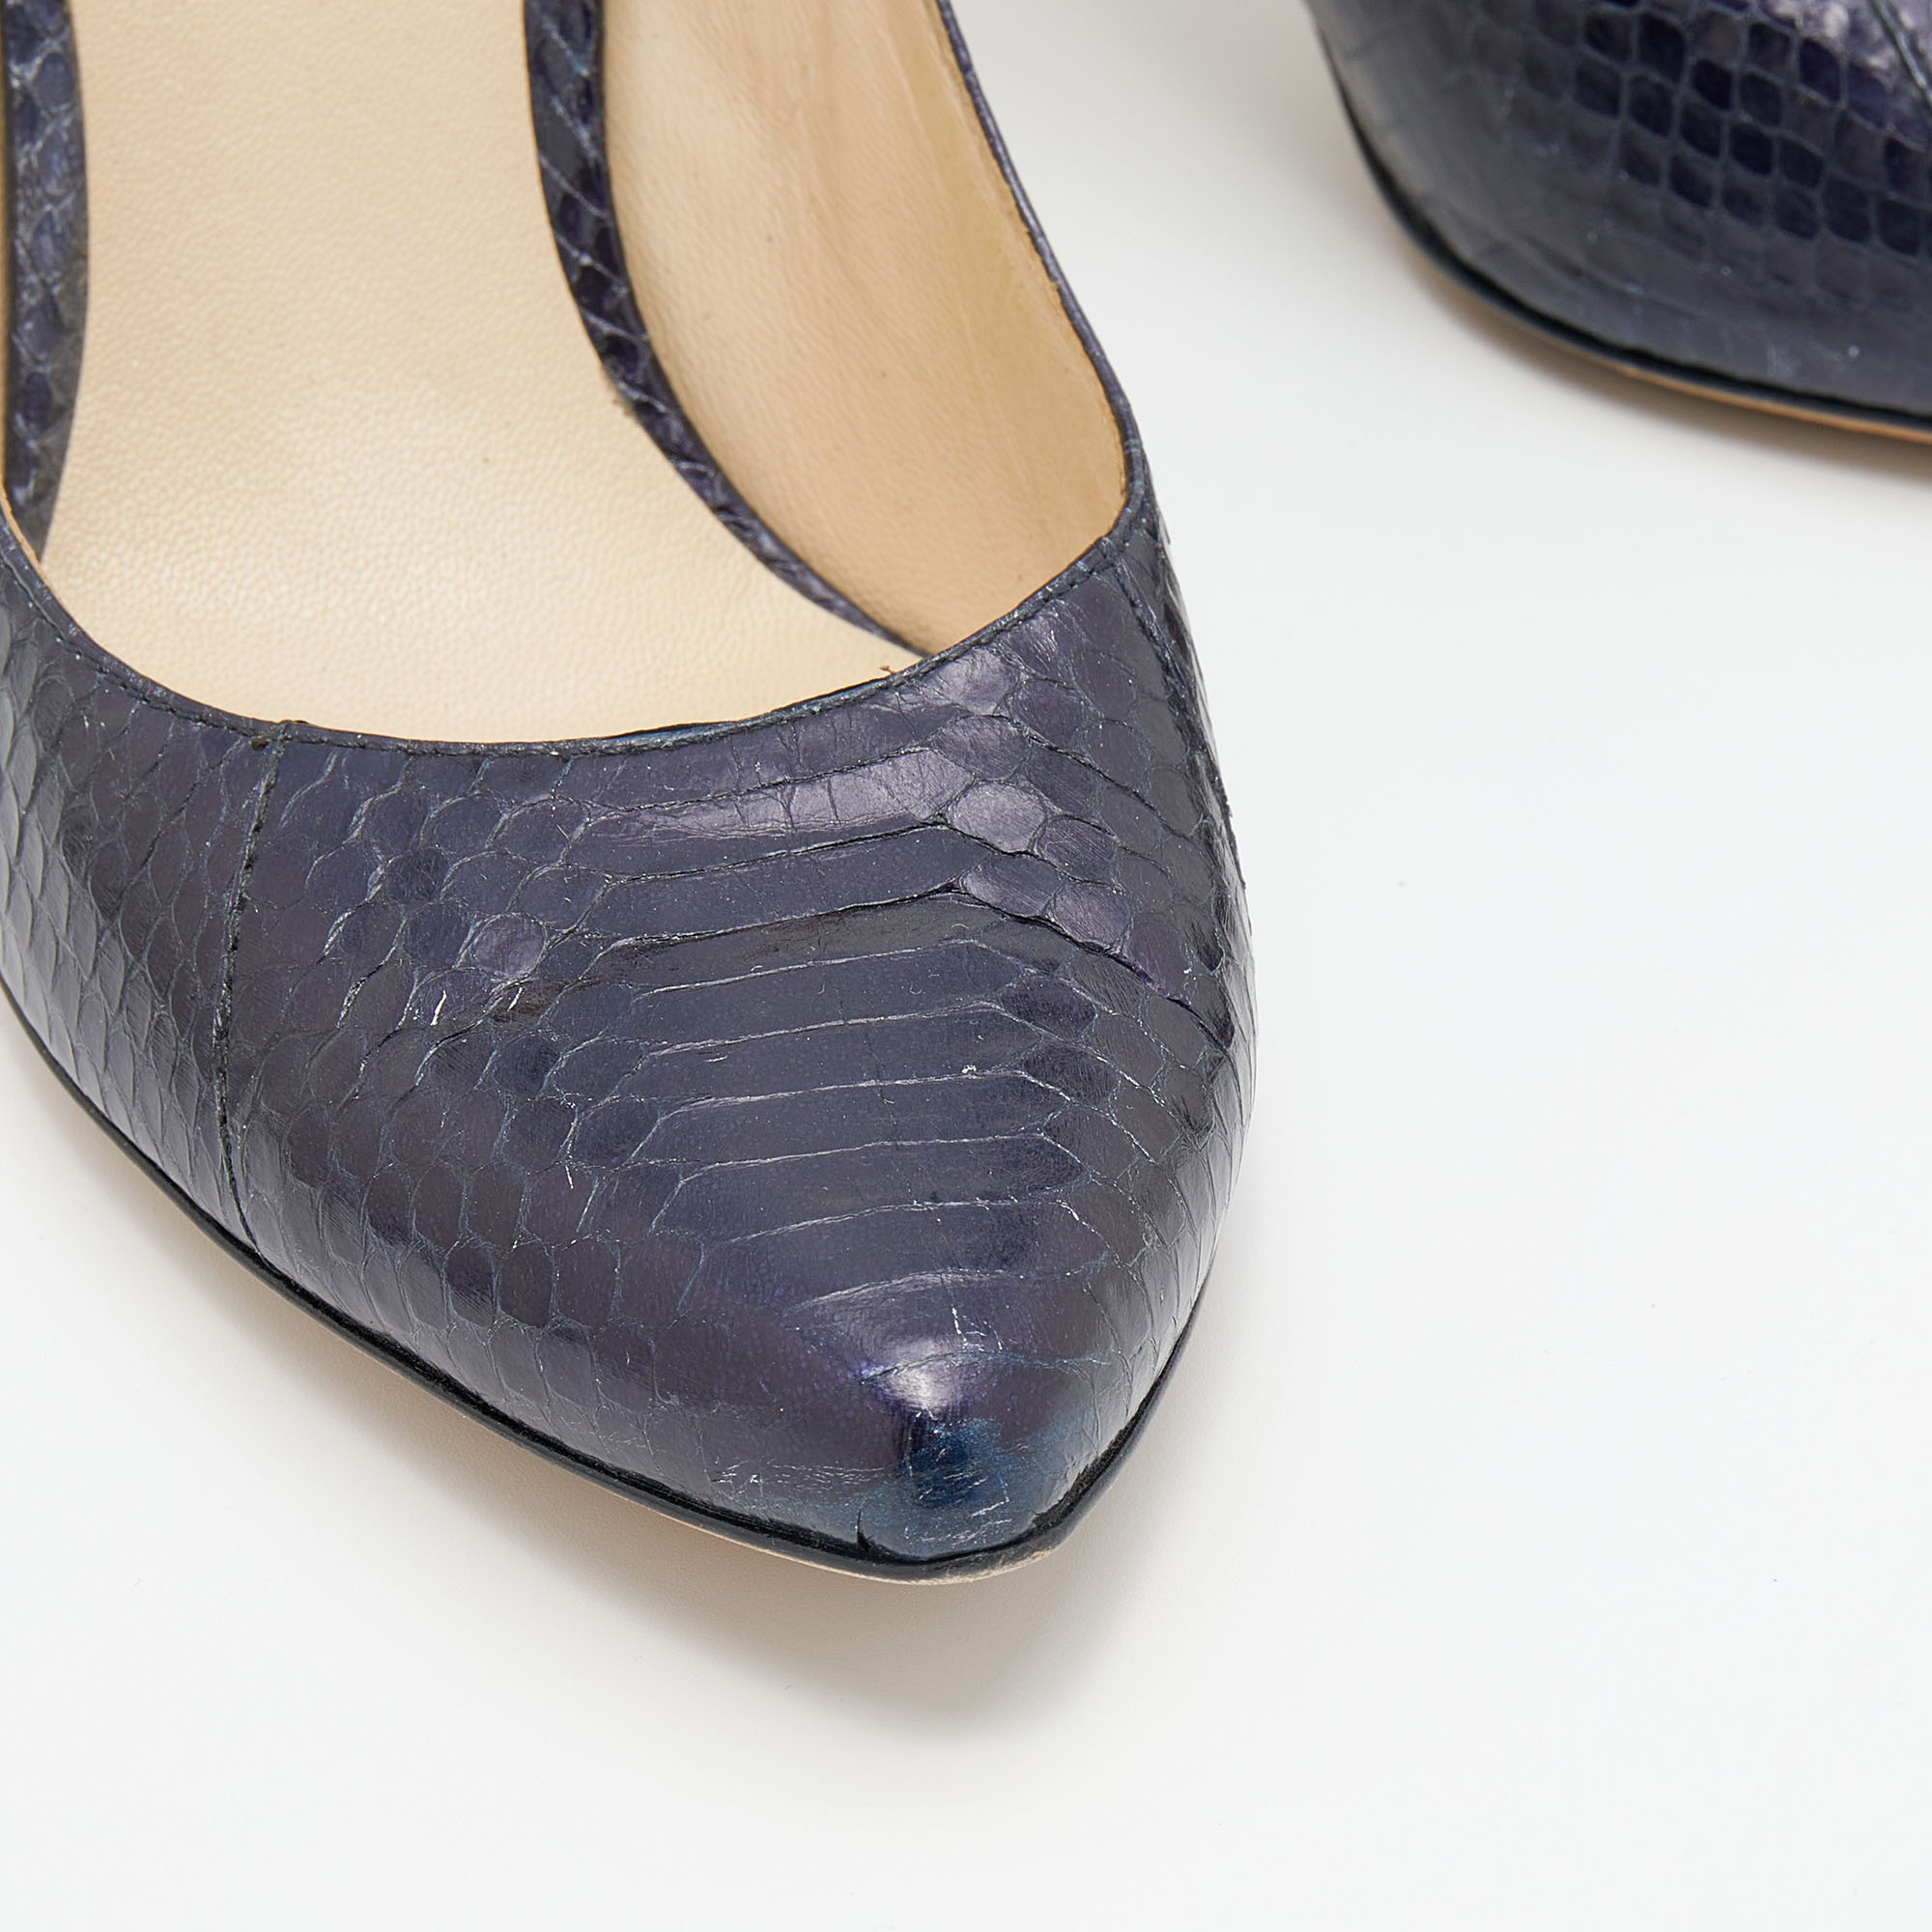 D&G Blue Snakeskin Embossed Leather Pointed Toe Pumps Size 38